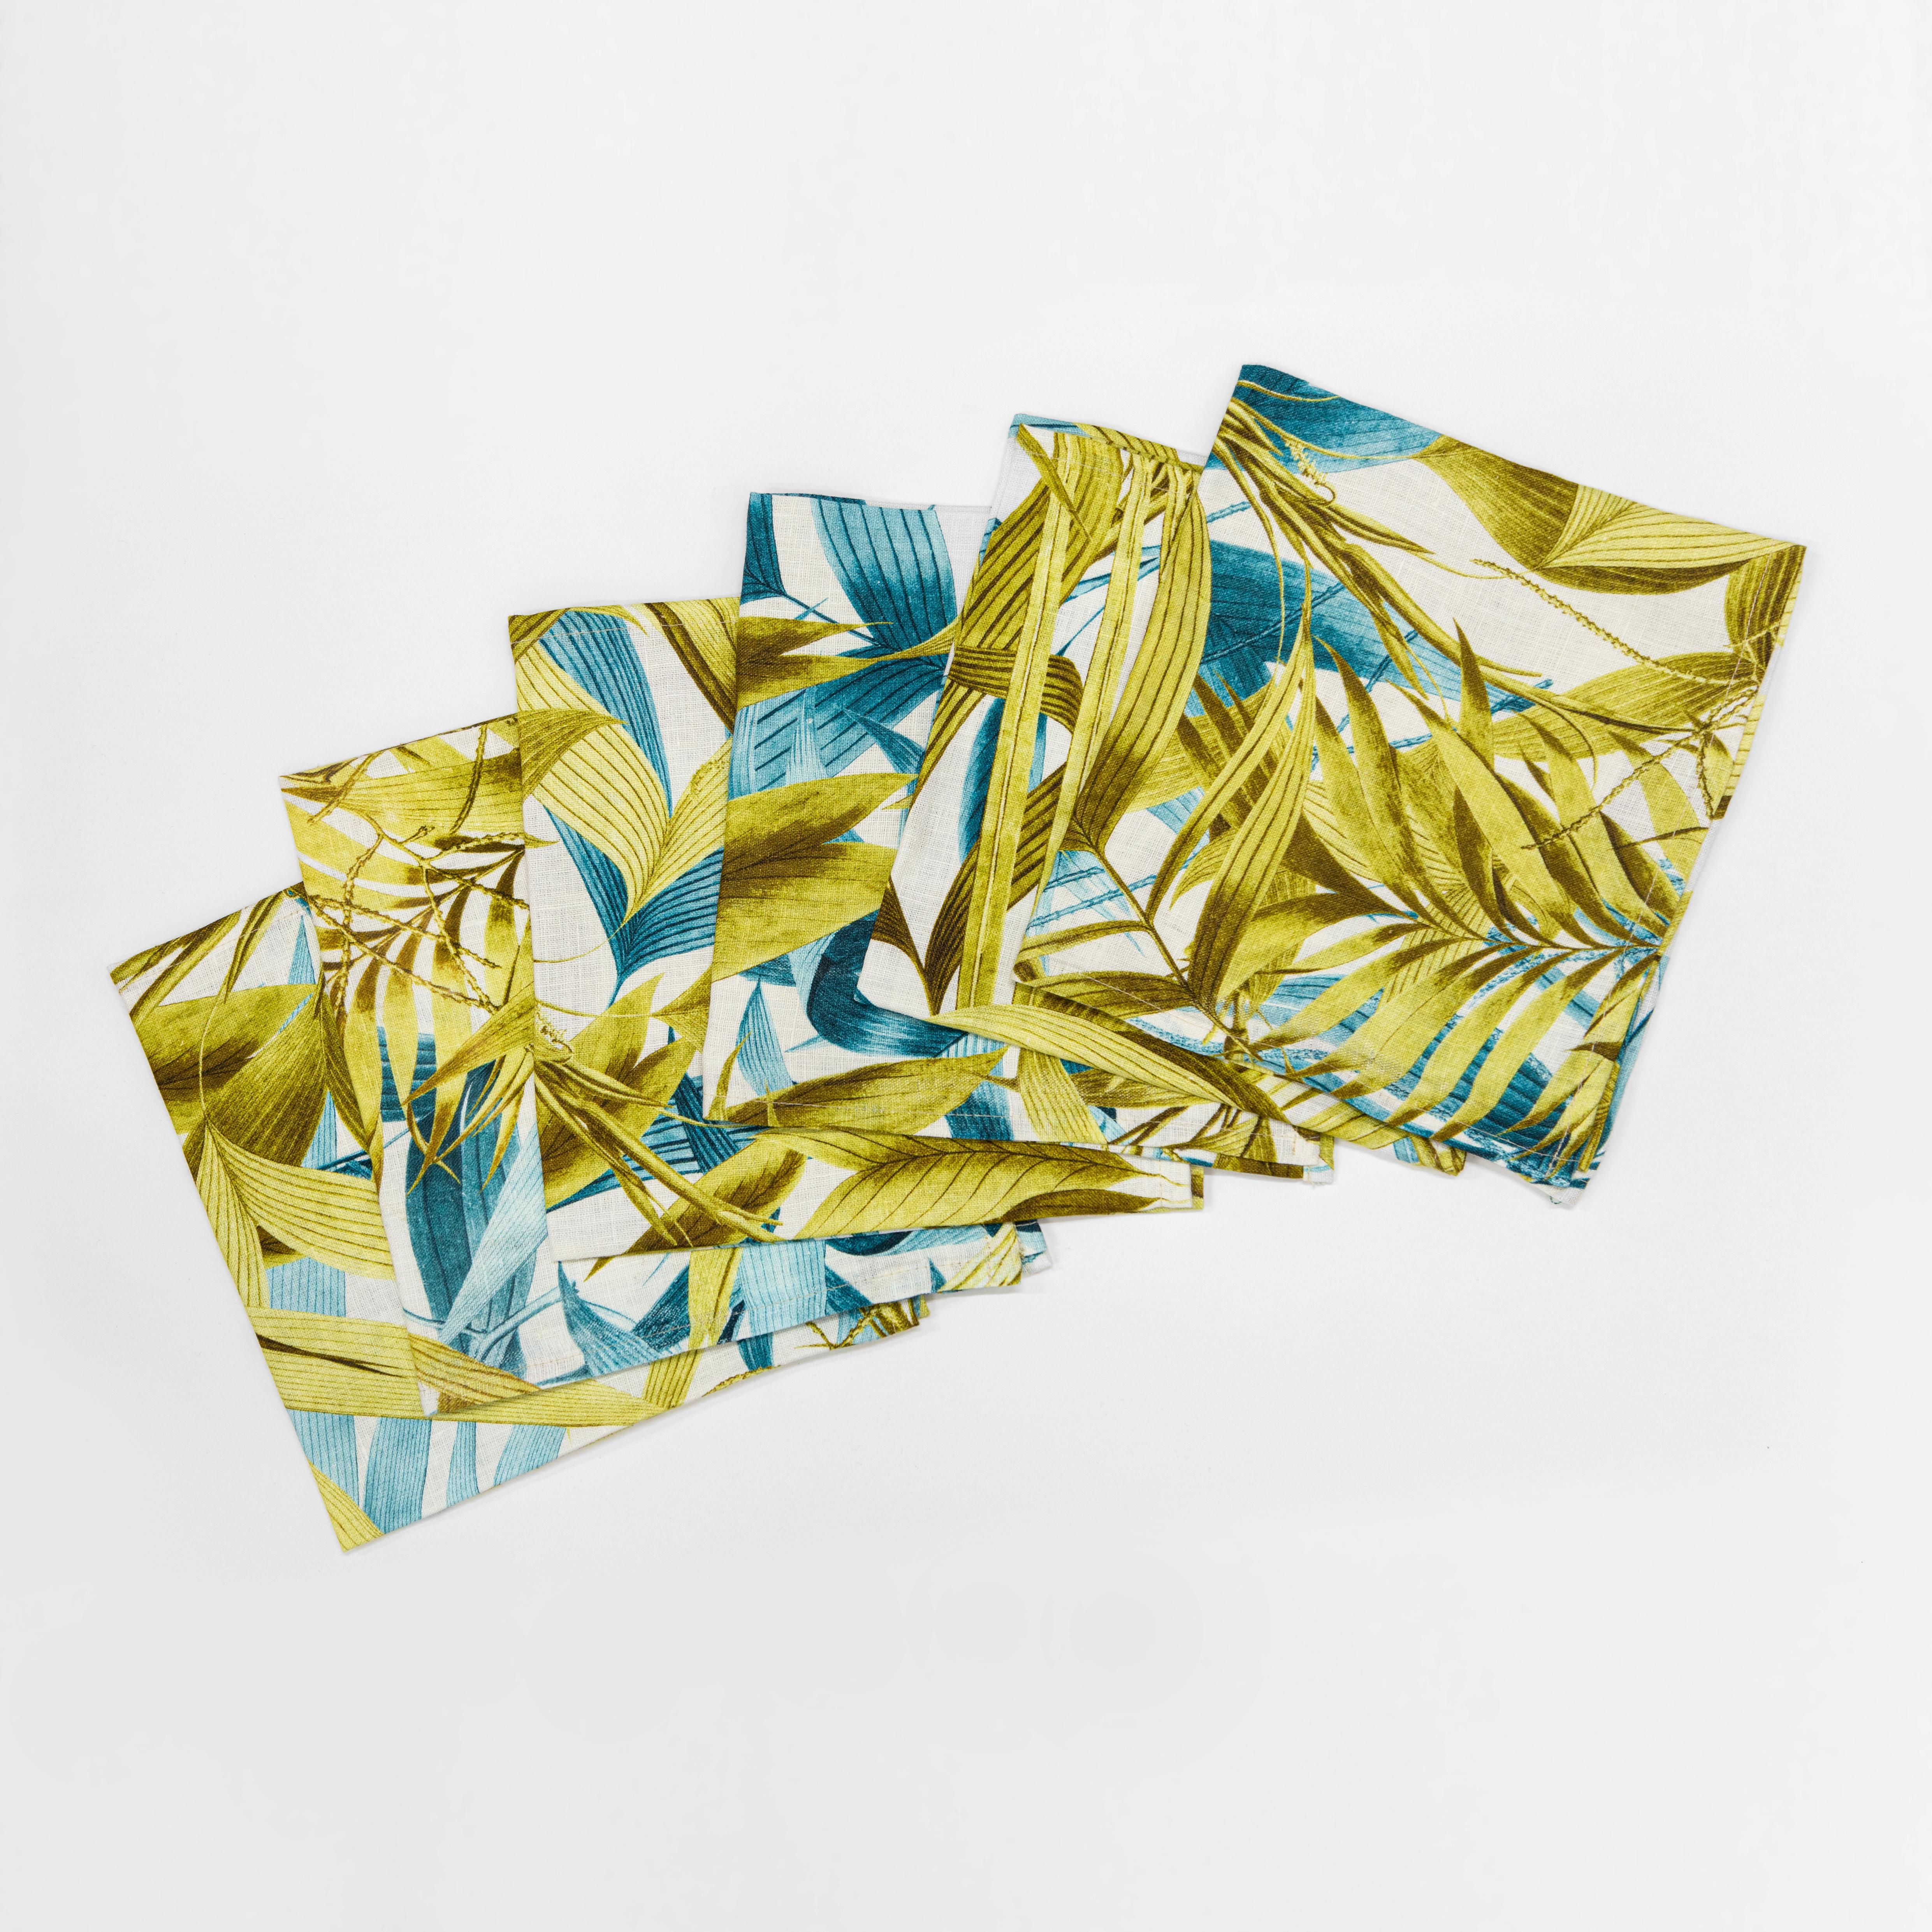 Eclectic and suitable for multiple occasions, this linen tablecloth is composed of a dense interweaving of yellow and turquoise palm leaves, strong contrast, and a unique impact that will give character and joy to your table.
1 250x150cm